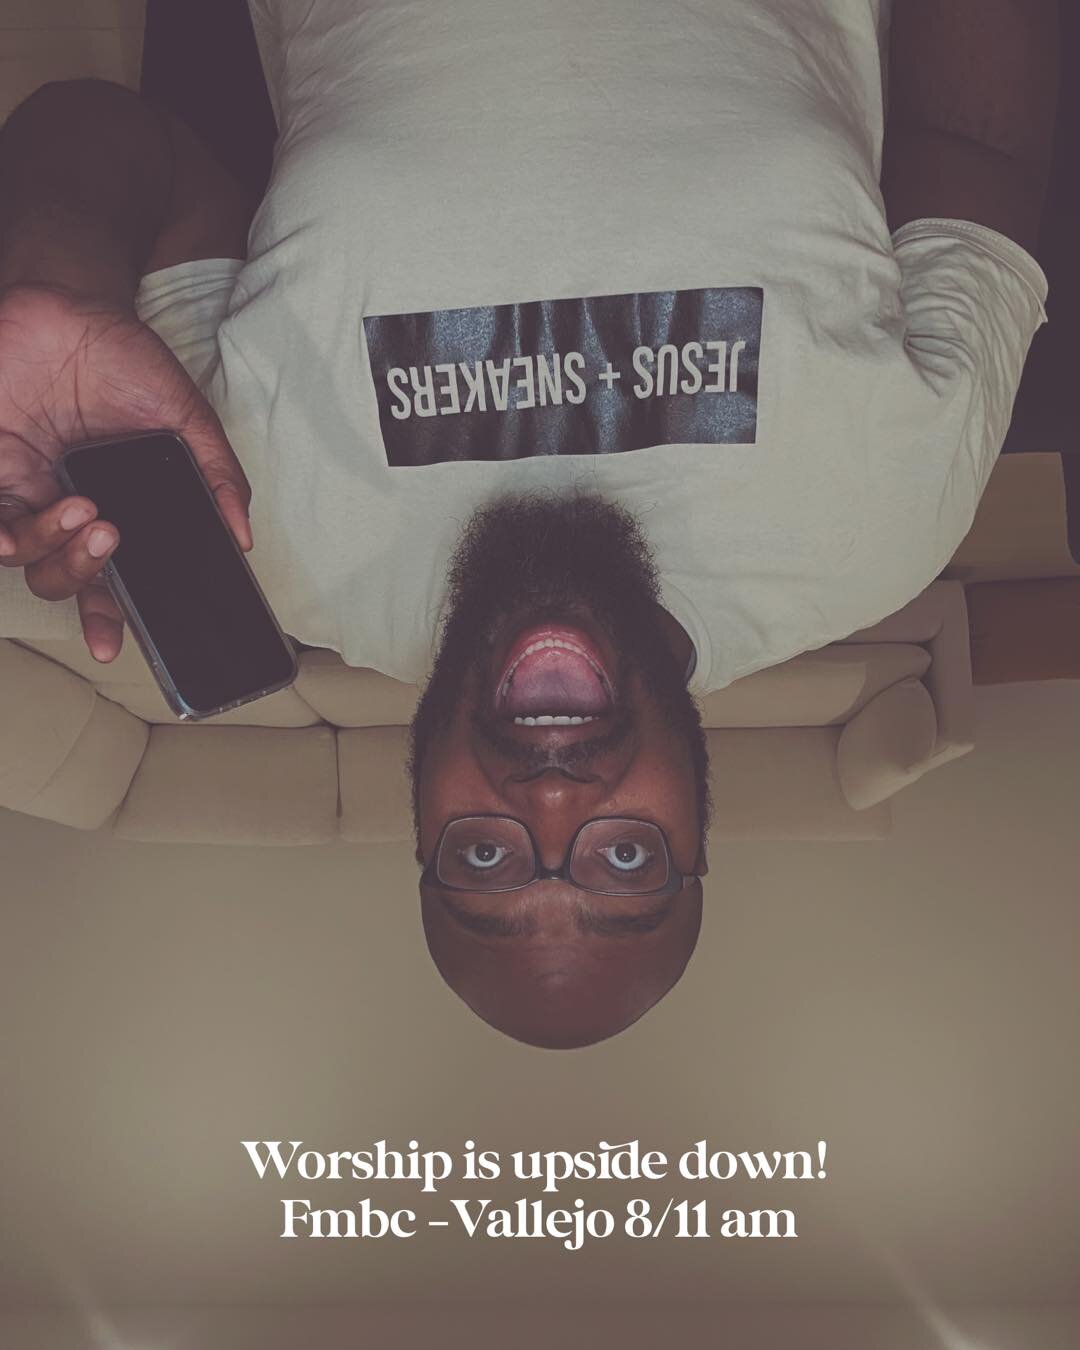 Tomorrows service is upside down!! 
Arrive on time! We are preaching at the top of the hour